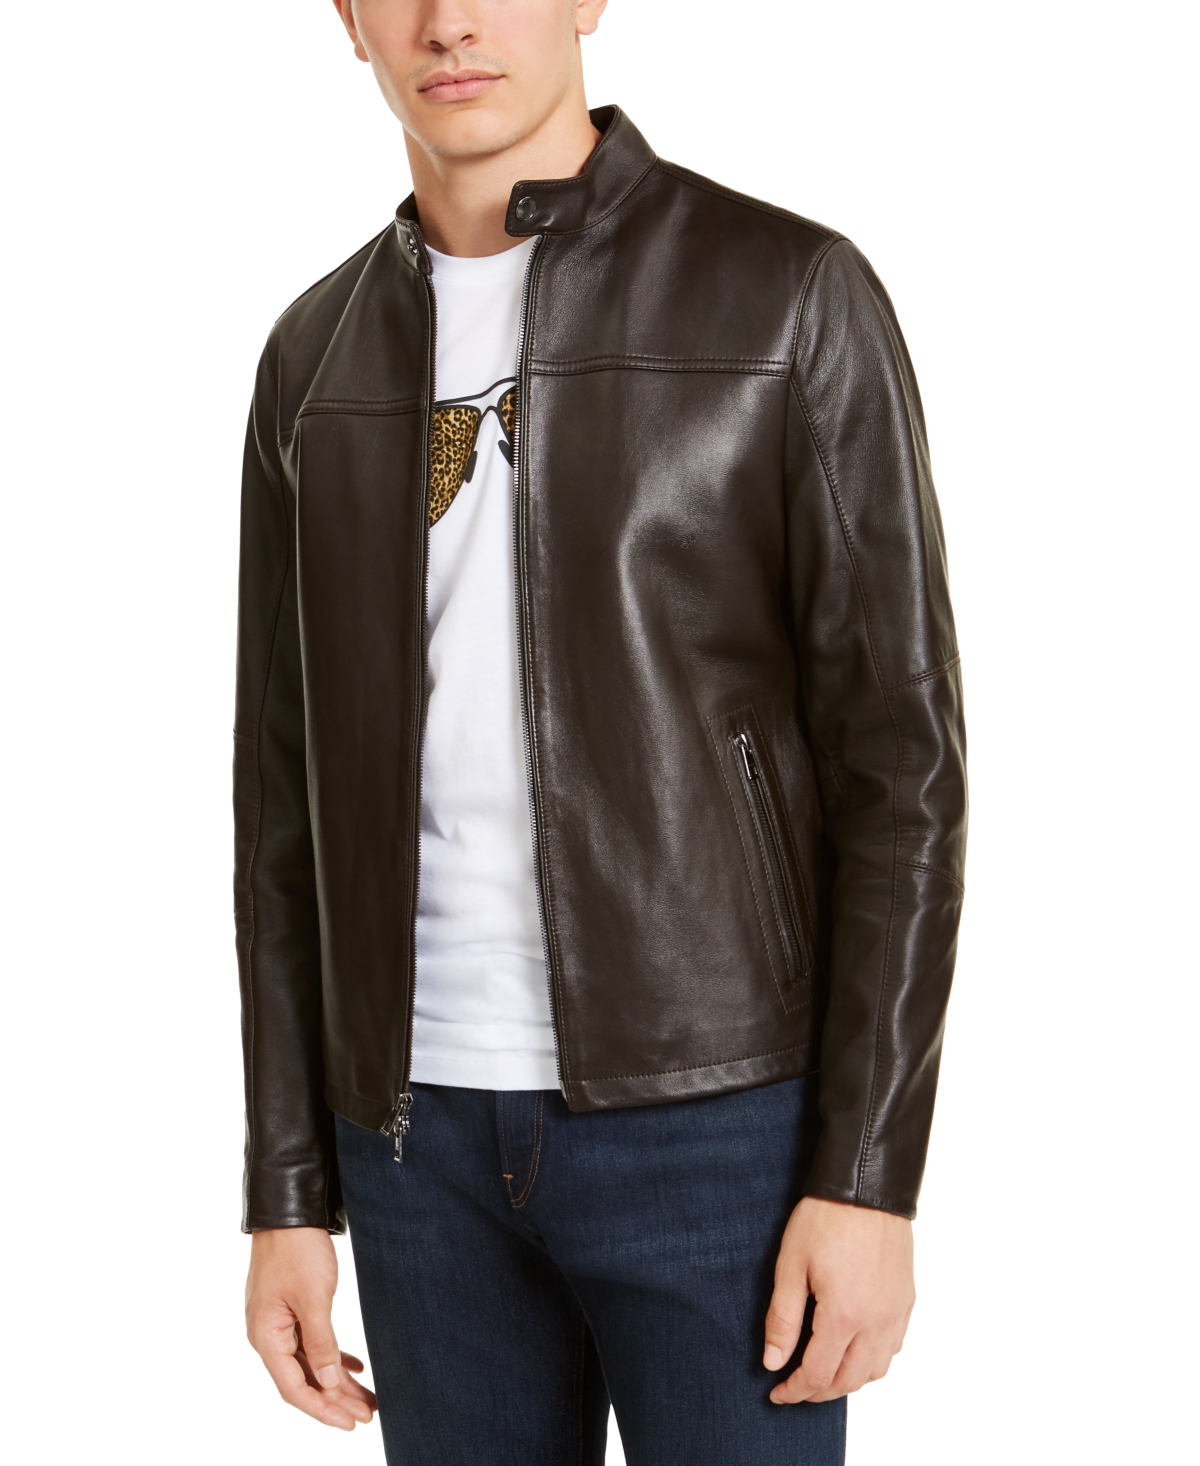 Men's Leather Racer Jacket, Created for Macy's - Chocolate